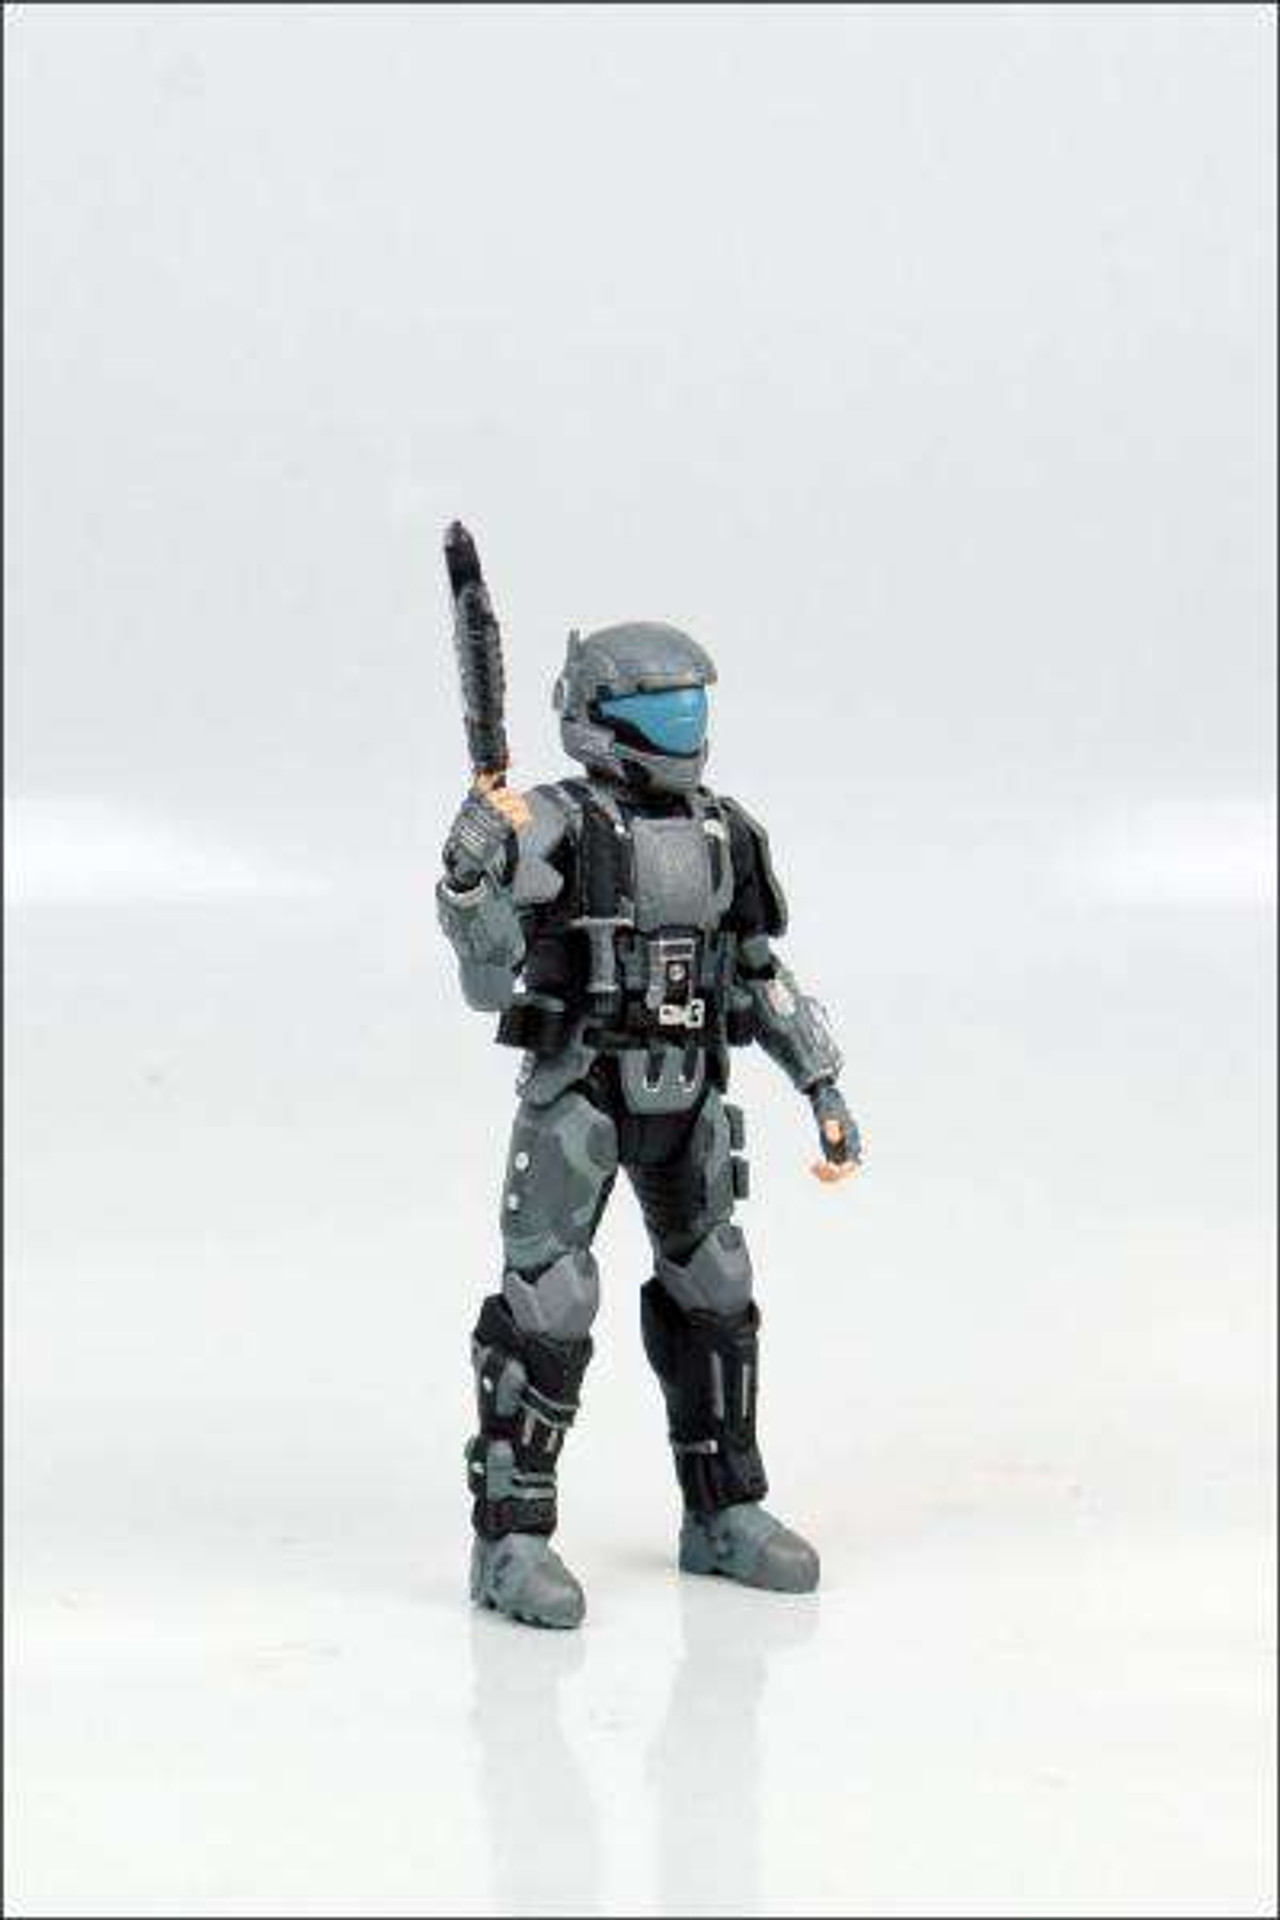 Mcfarlane Toys Halo 3 Series 8 Odst Soldier Buck Action Figure Toywiz